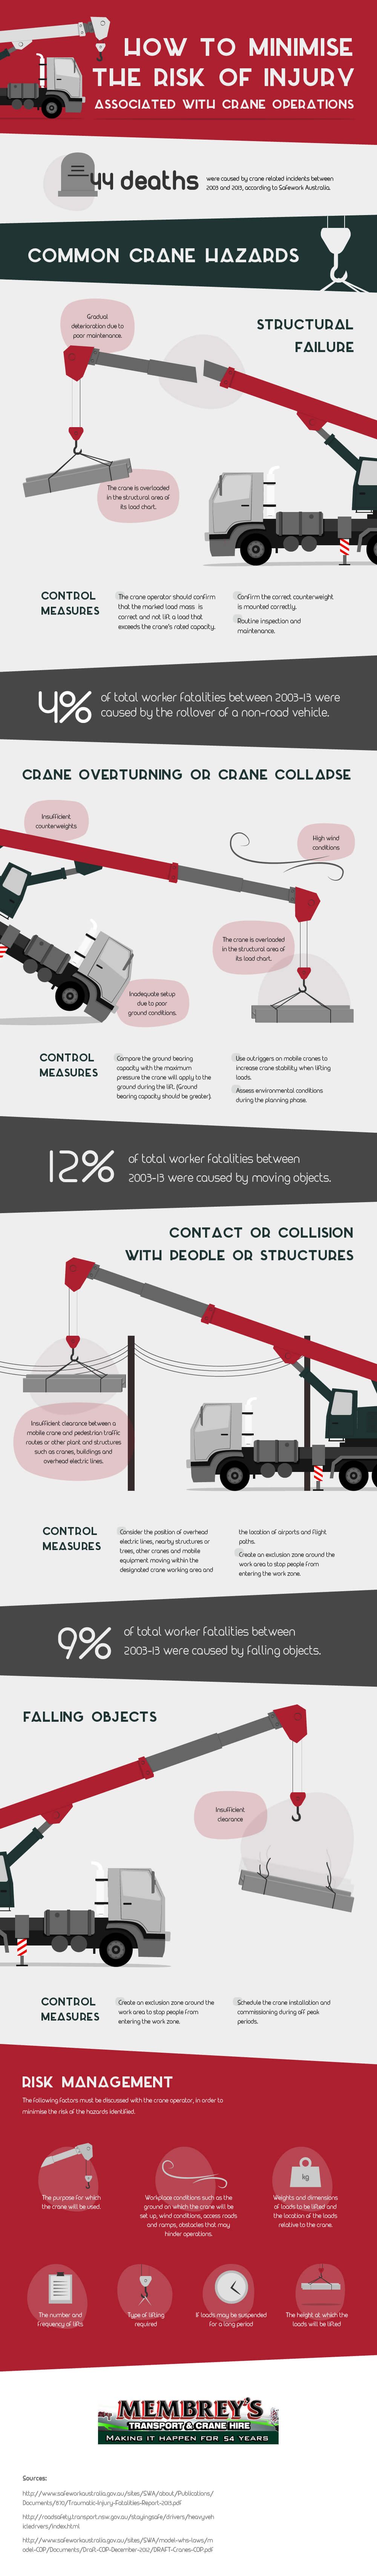 How To Minimize Risk of Injury Associated With Crane Operations